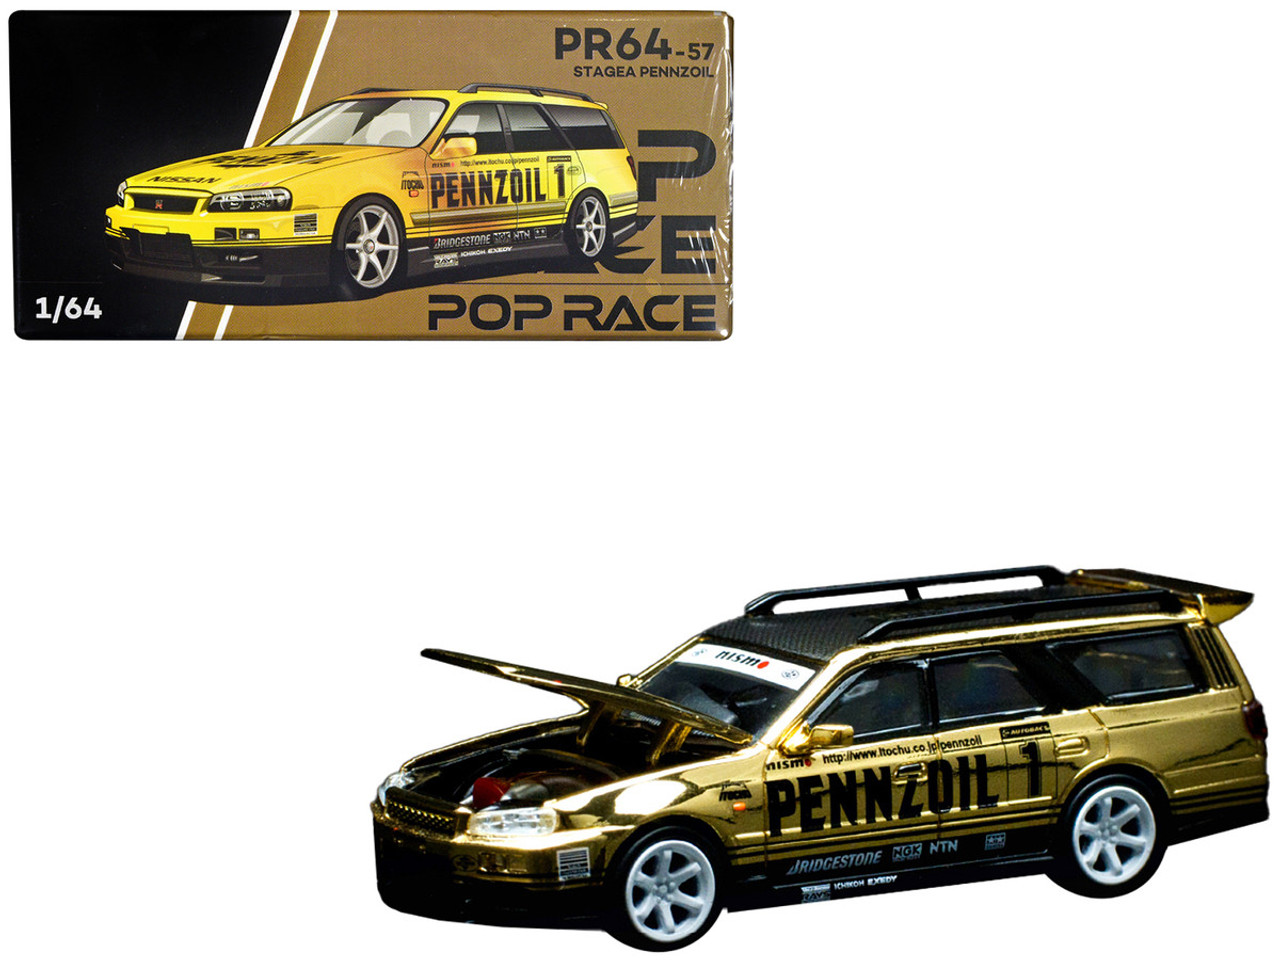 Nissan Stagea RHD (Right Hand Drive) #1 "Pennzoil" Gold Chrome with Carbon Top 1/64 Diecast Model Car by Pop Race